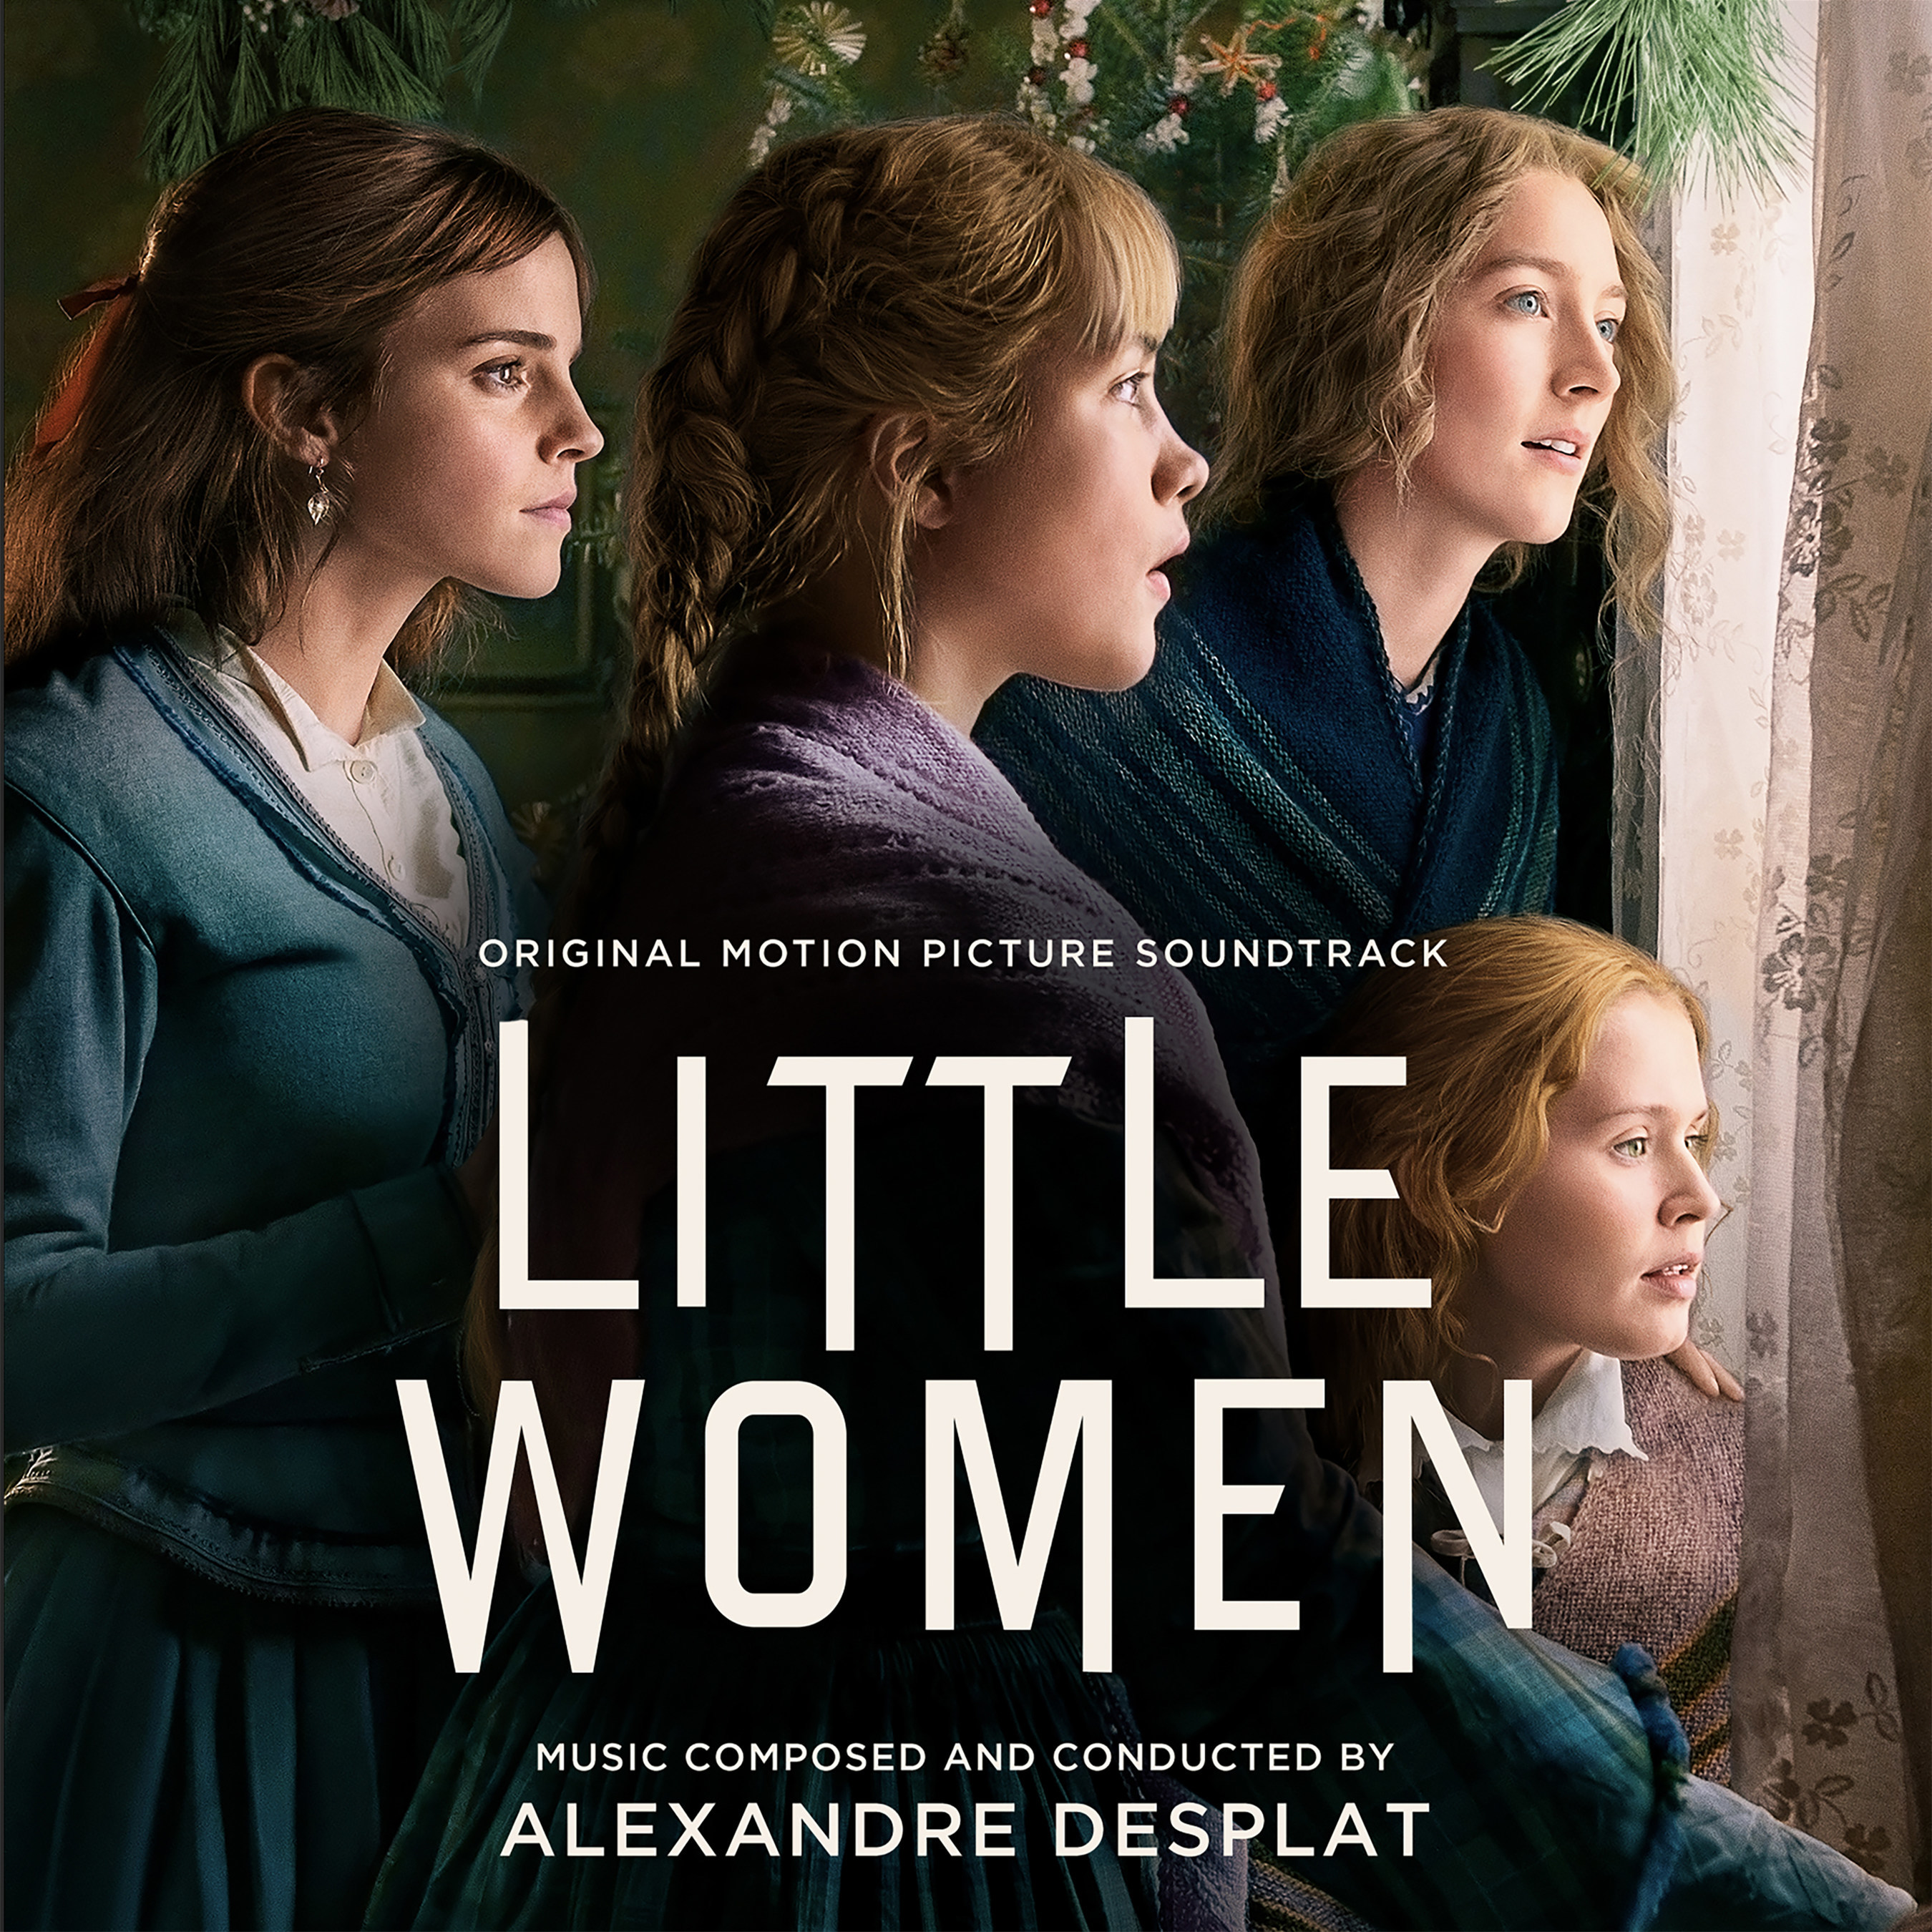 Little Women Original Motion Picture Soundtrack With Music Composed & Conducted By Alexandre Desplat